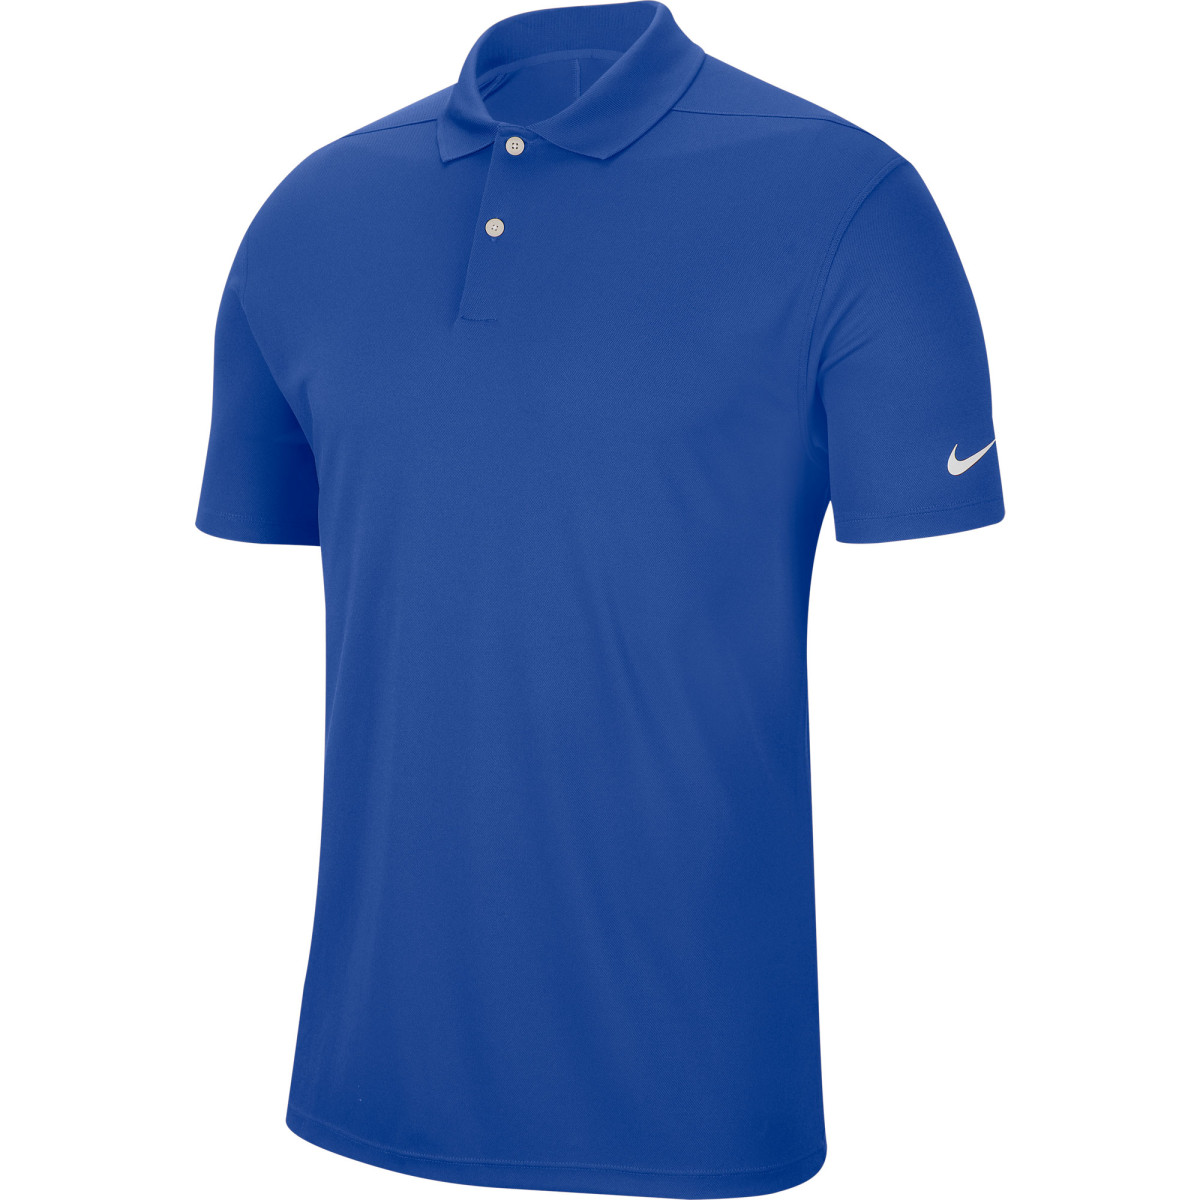 Nike Dry Solid Victory Polo